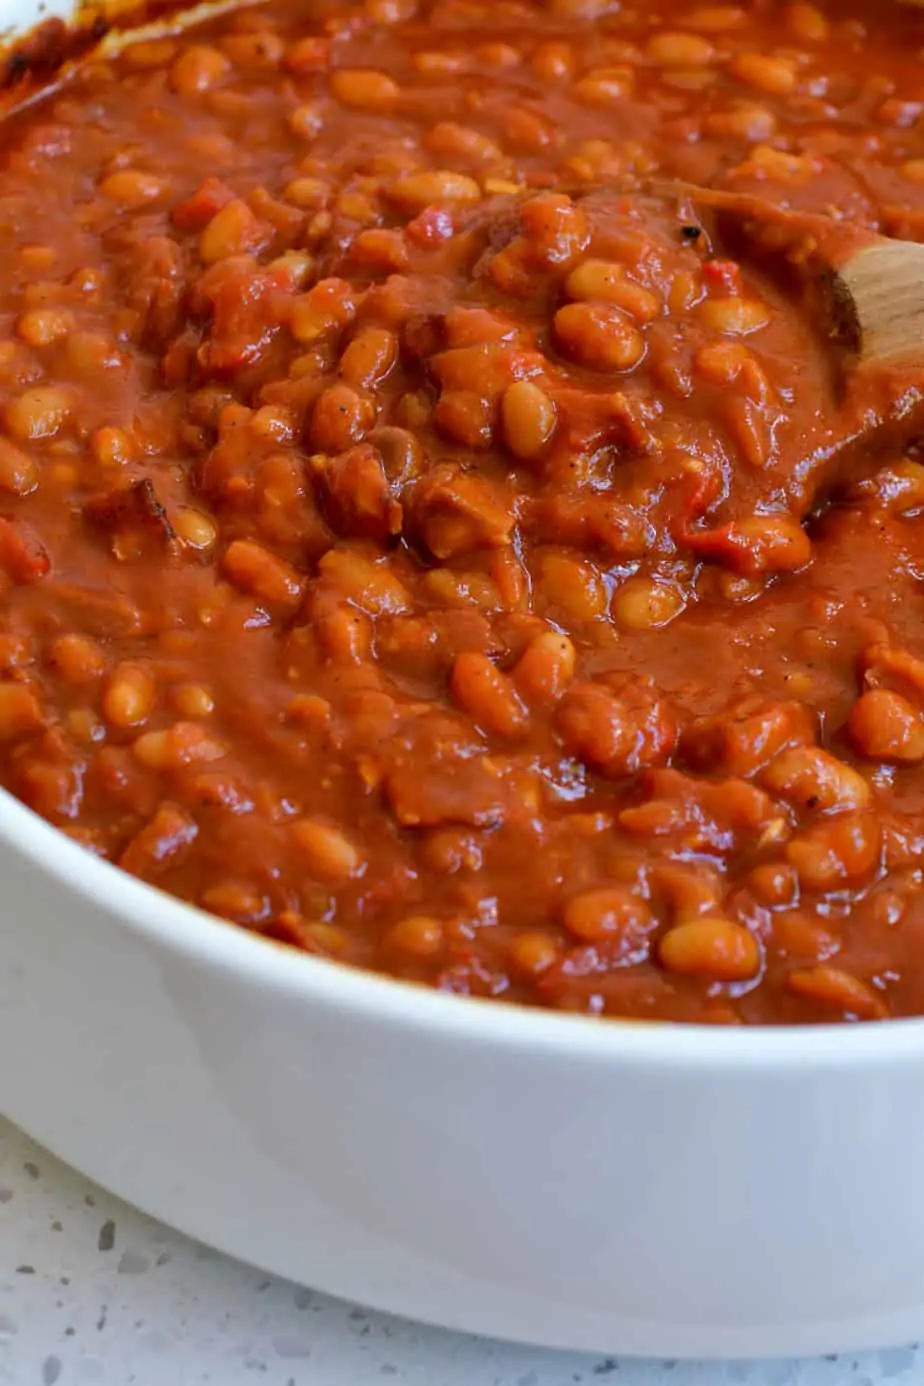 These classic baked beans are the perfect side dish for all your summer grilling and barbecuing needs.